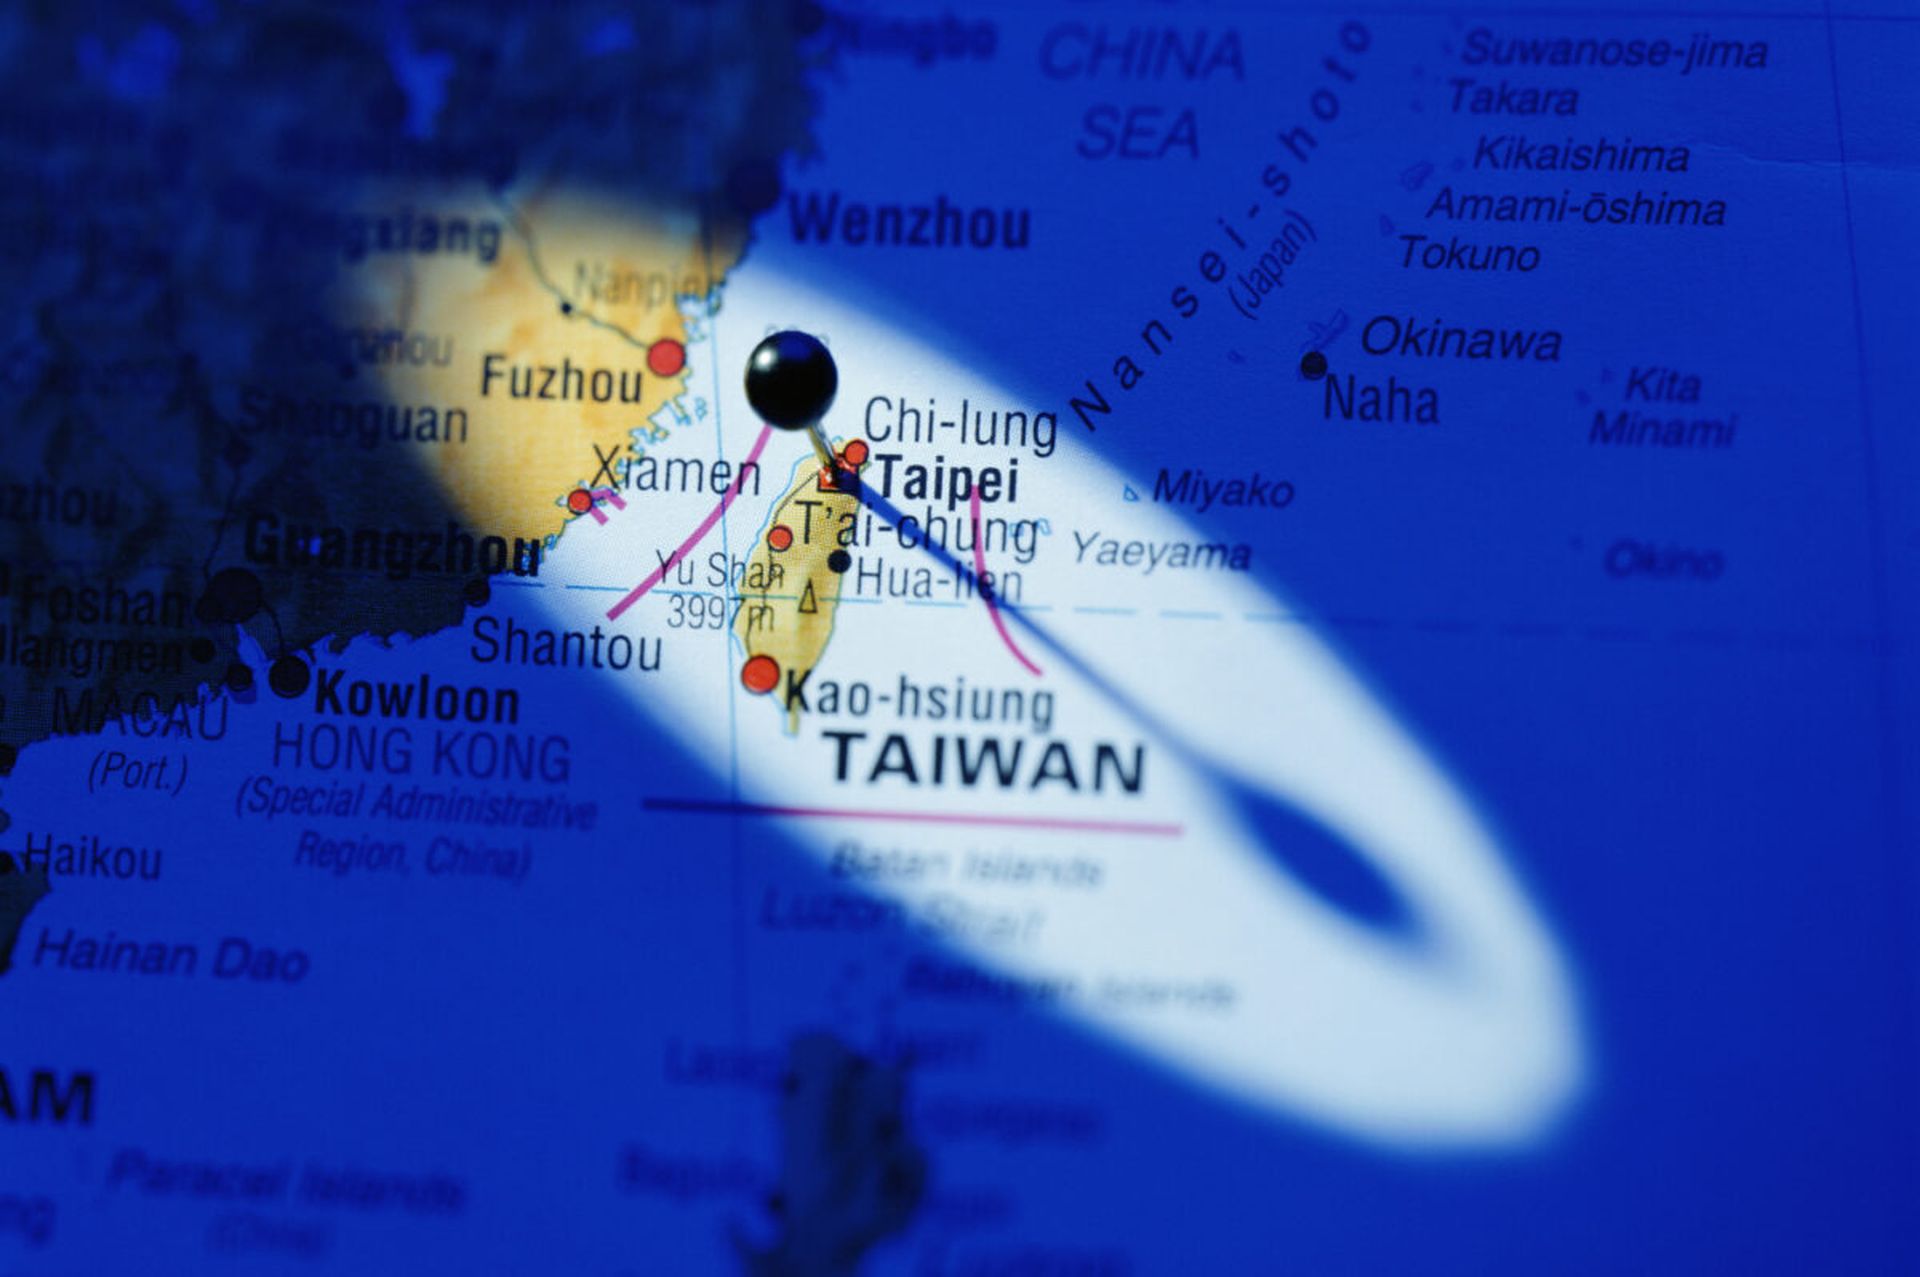 Microsoft is concerned that a new hacking group targeting Taiwan entities had developed “techniques that could be easily reused in other operations outside the region.” (Image Credit: Jeffrey Coolidge)